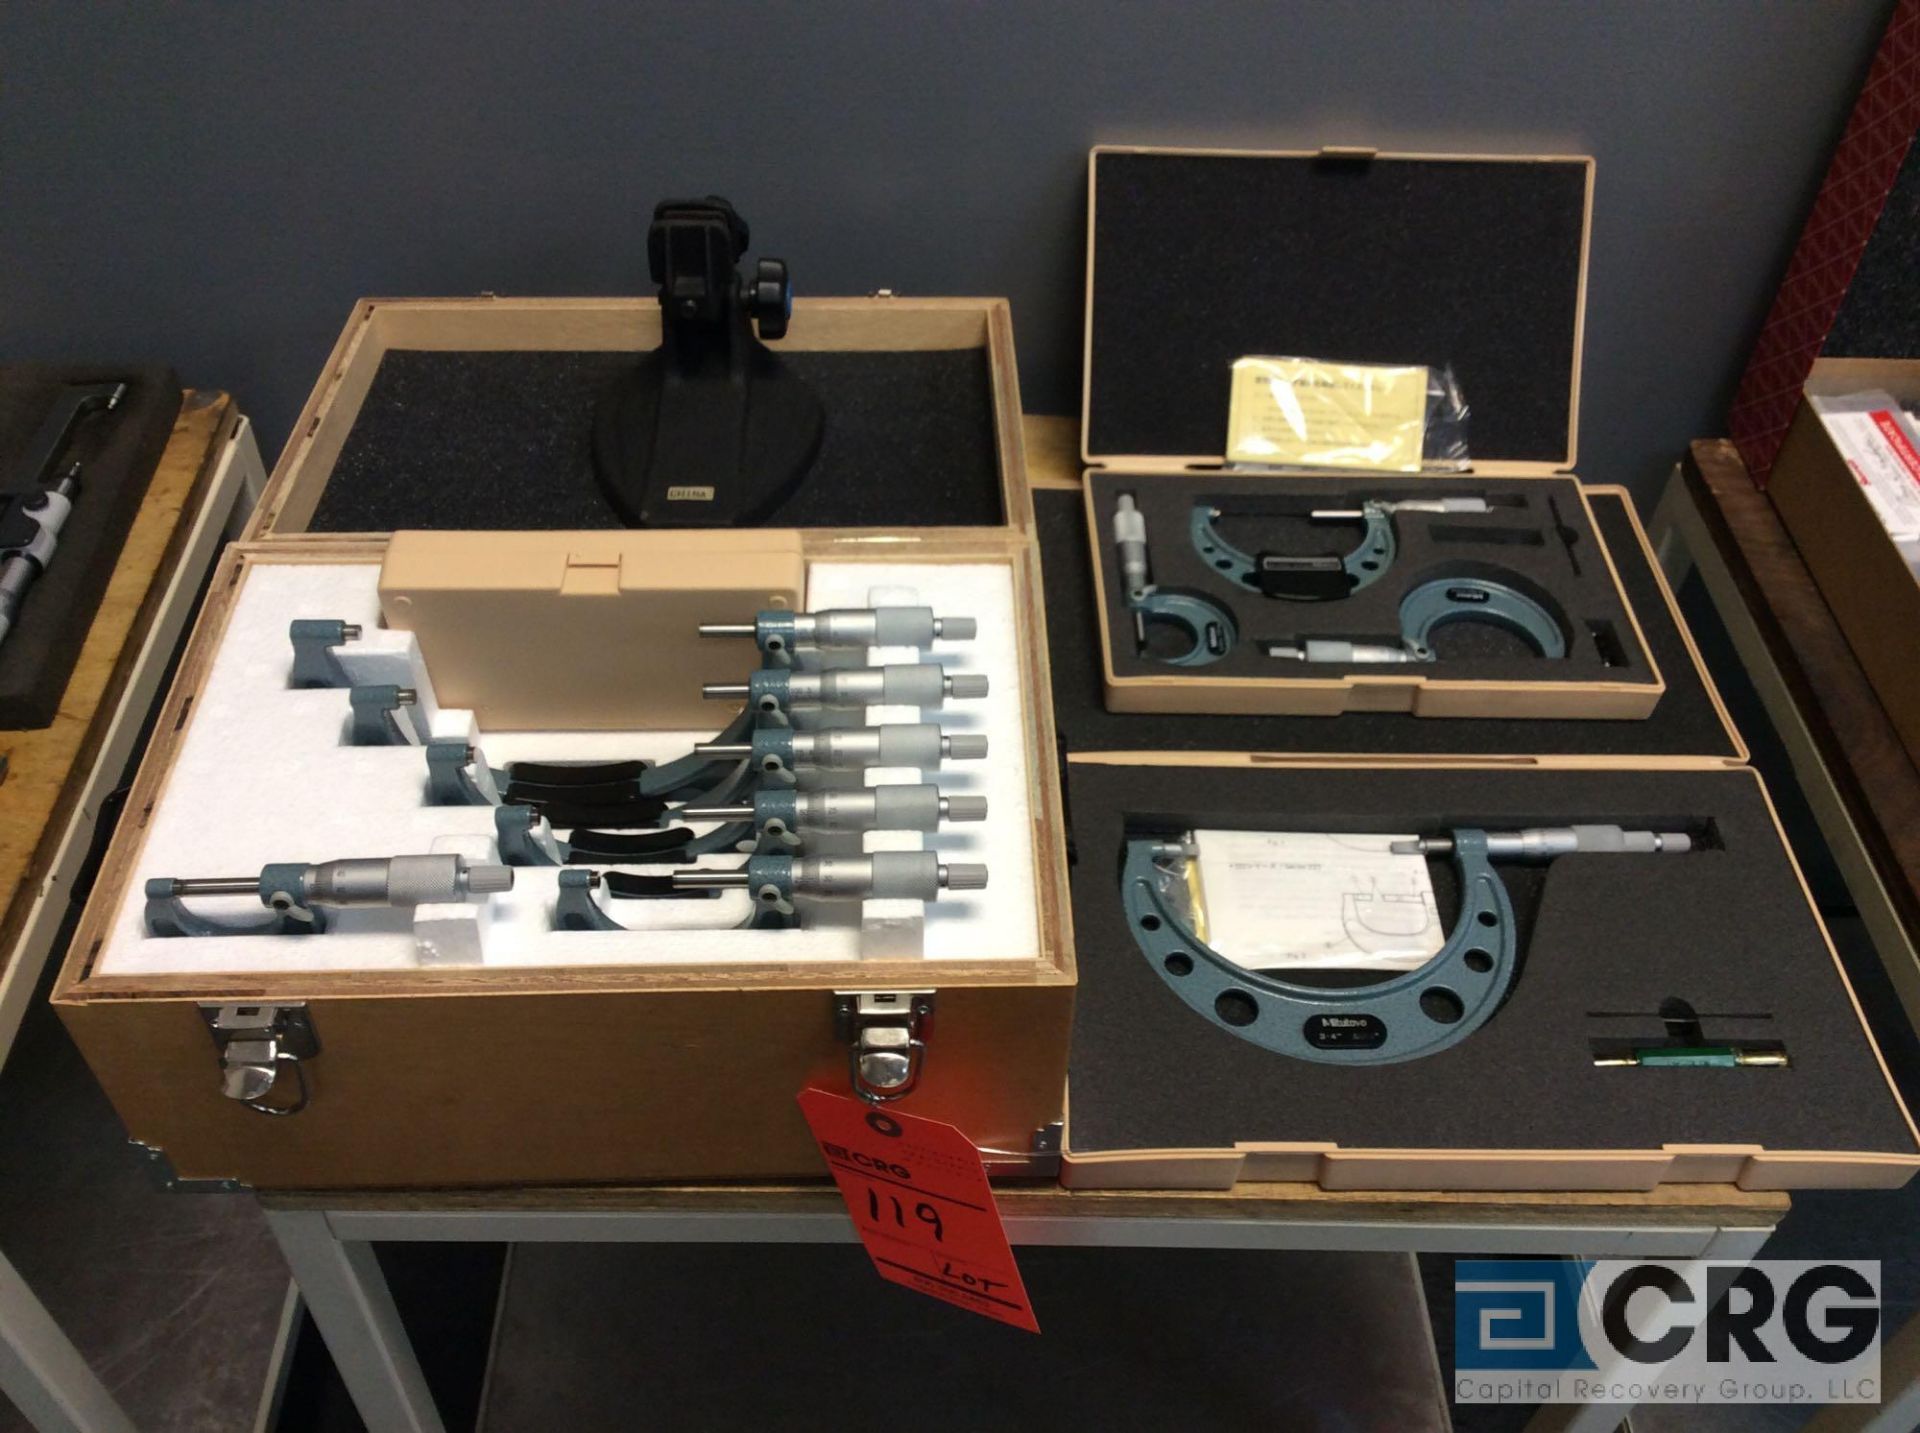 Lot of Mitutoyo OD micrometers including (1) set of 0-6" mc set with case, and (1) 3-4" OD